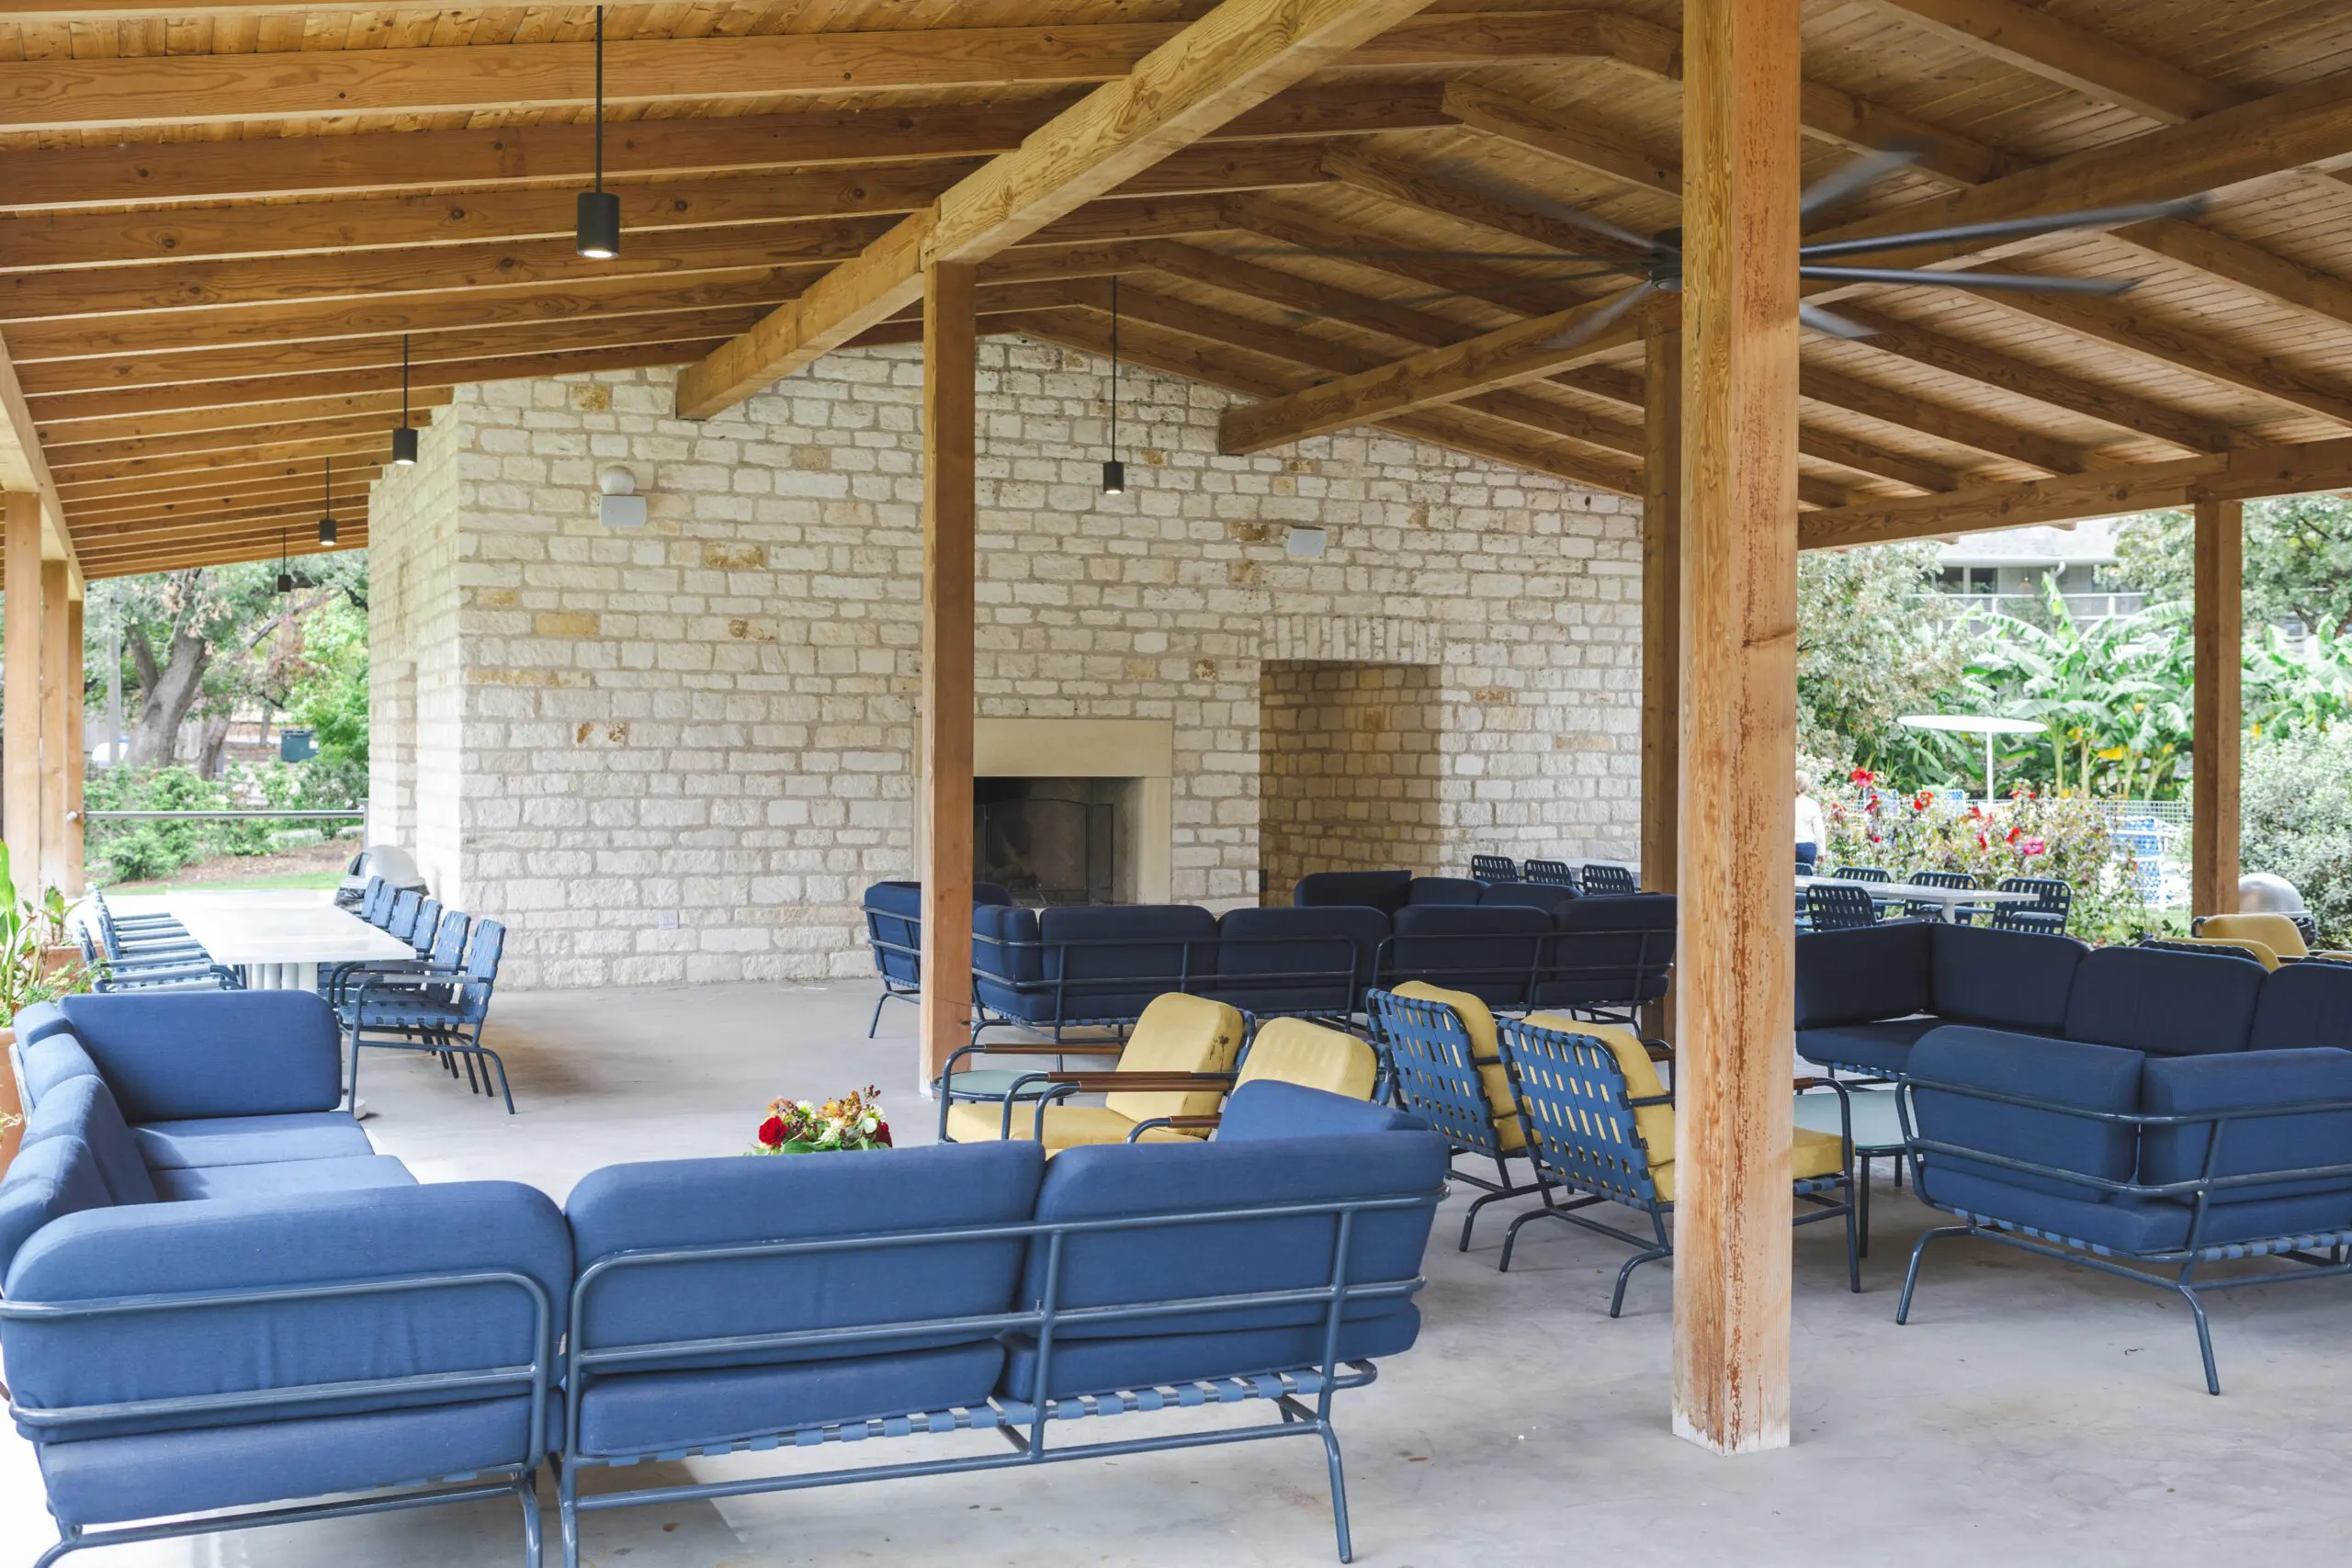 Outdoor pavilion with blue seating and wooden beams at the Stagecoach Inn in Salado, Texas.